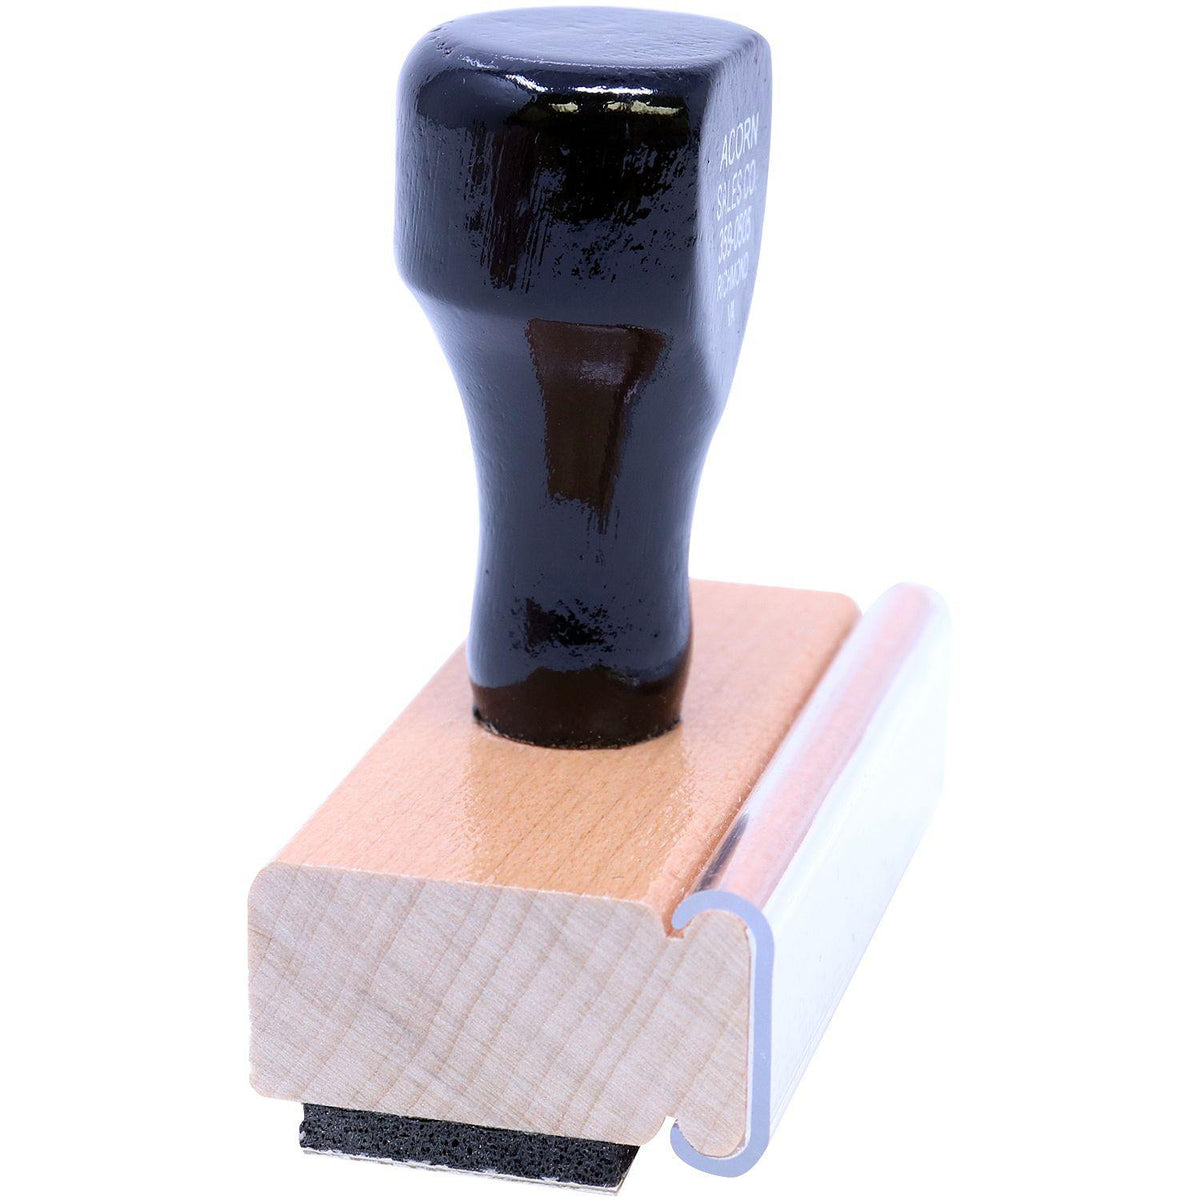 Side View of Large Postmaster Rubber Stamp at an Angle